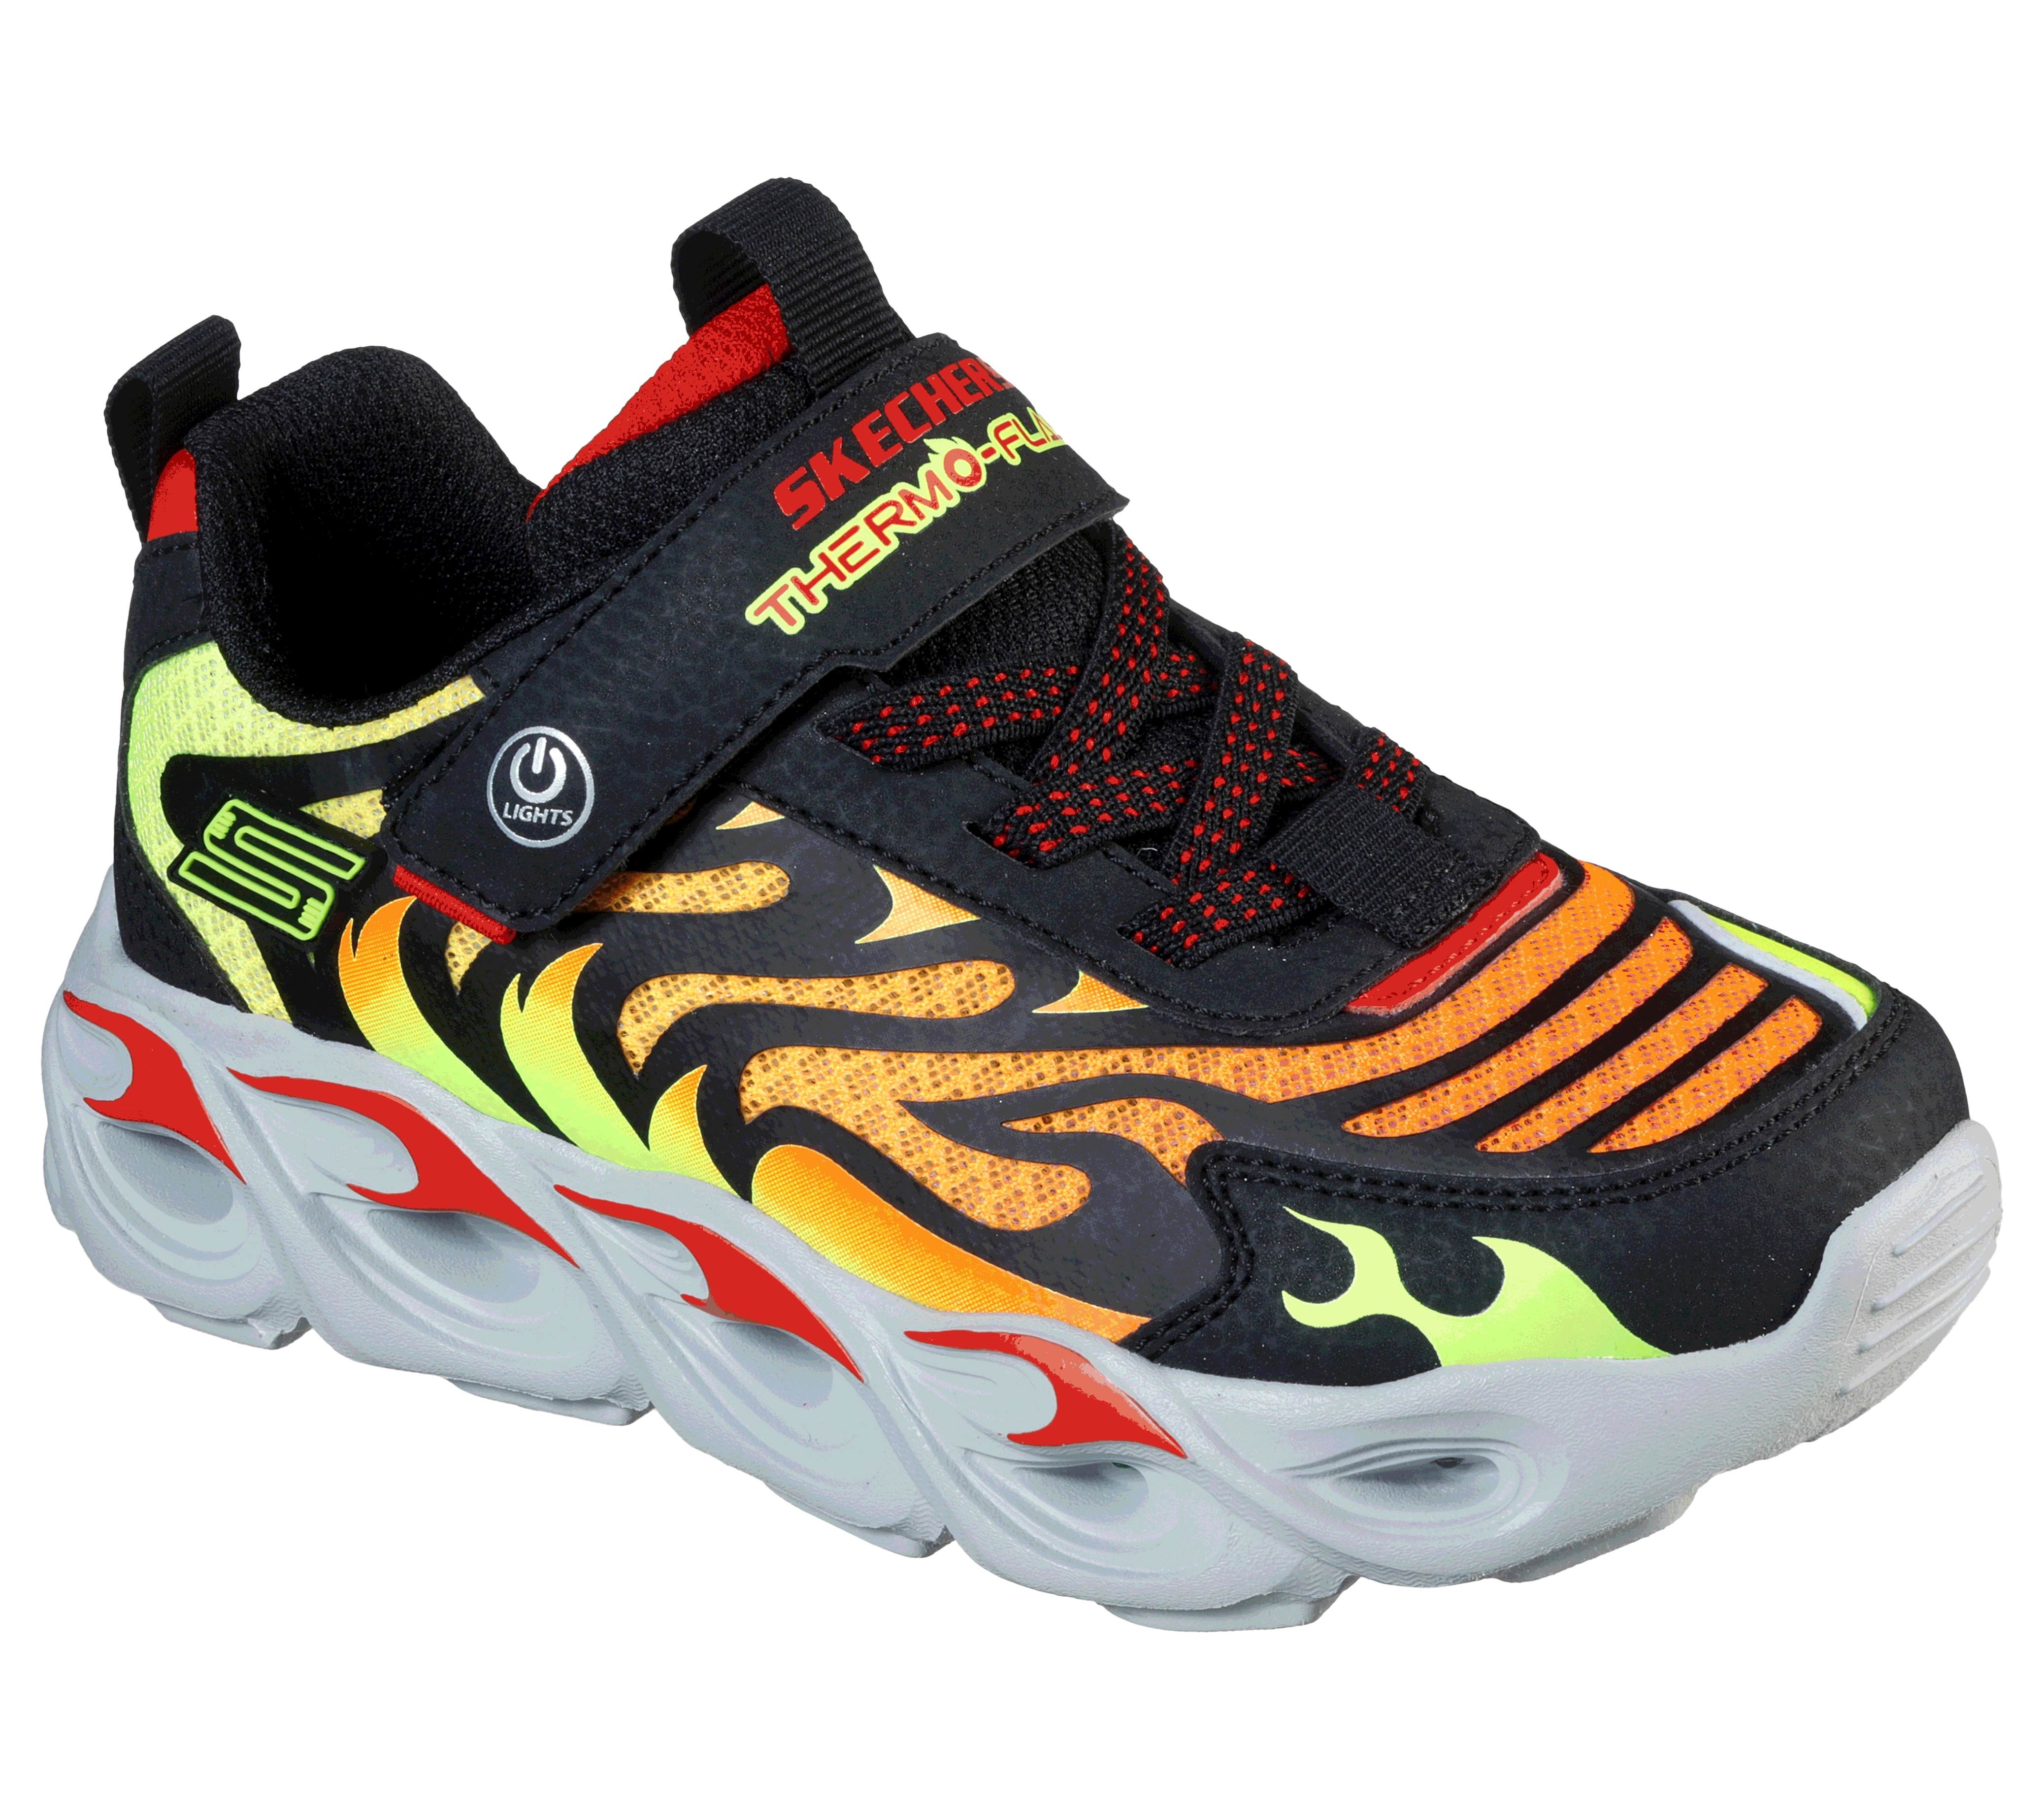 Skechers Skechers Thermo Flash NVLM | sites.unimi.it